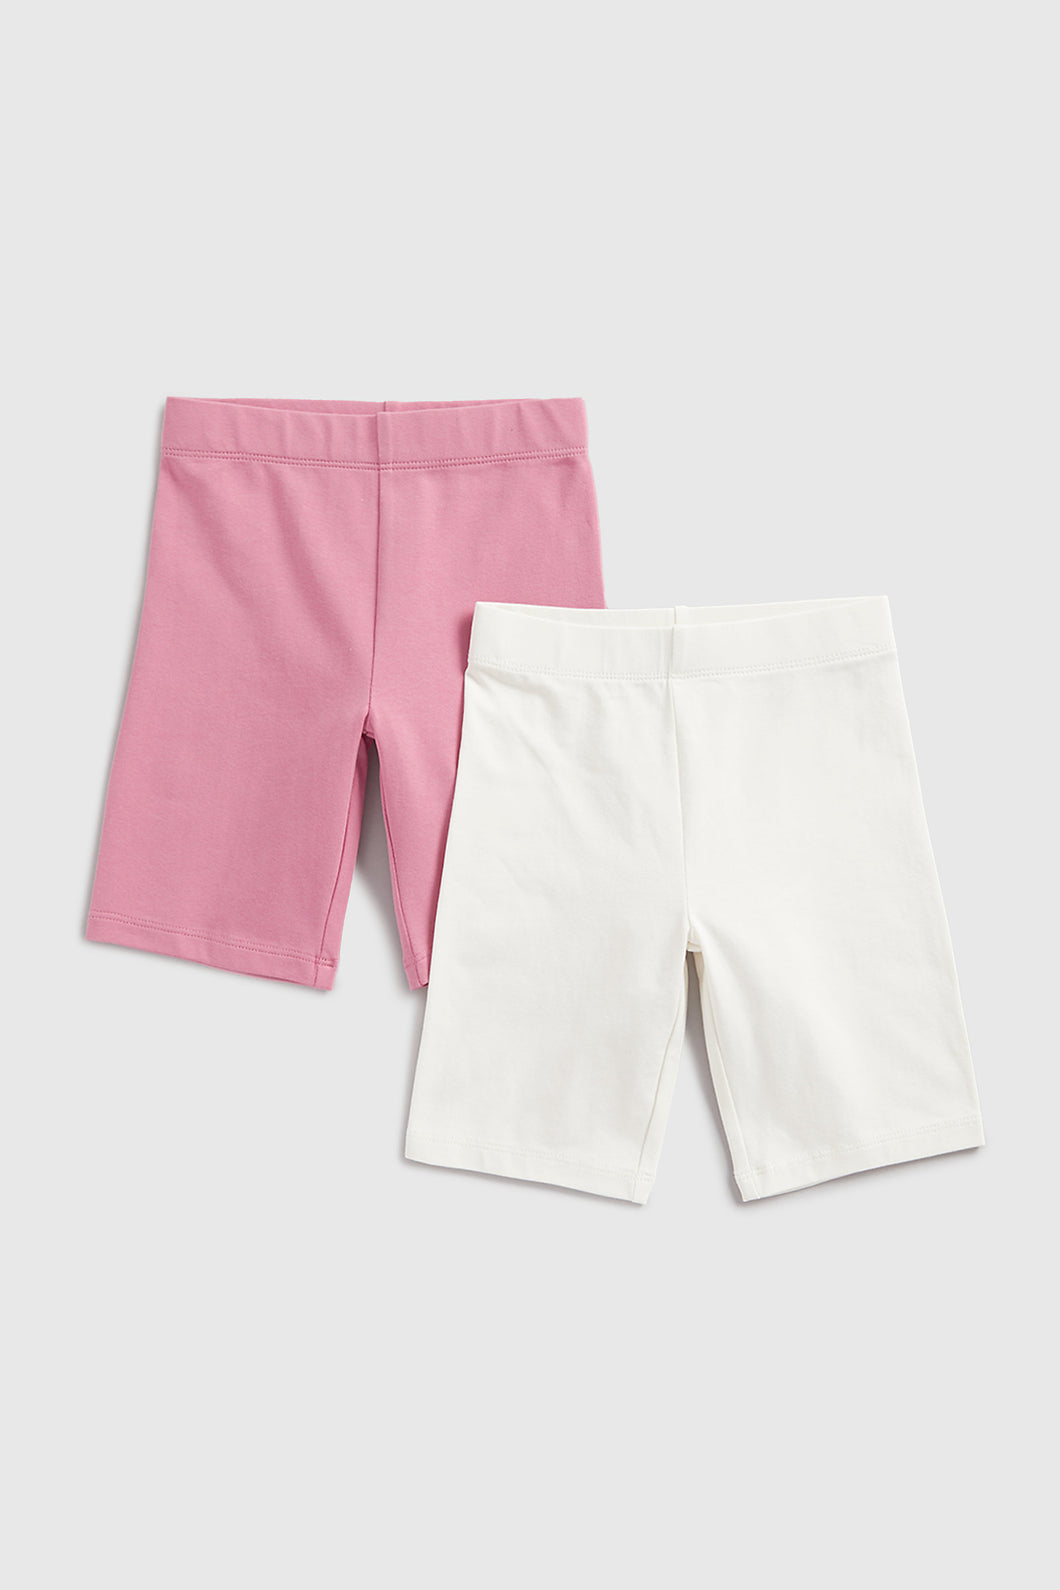 Mothercare Cream and Pink Cycle Shorts - 2 Pack